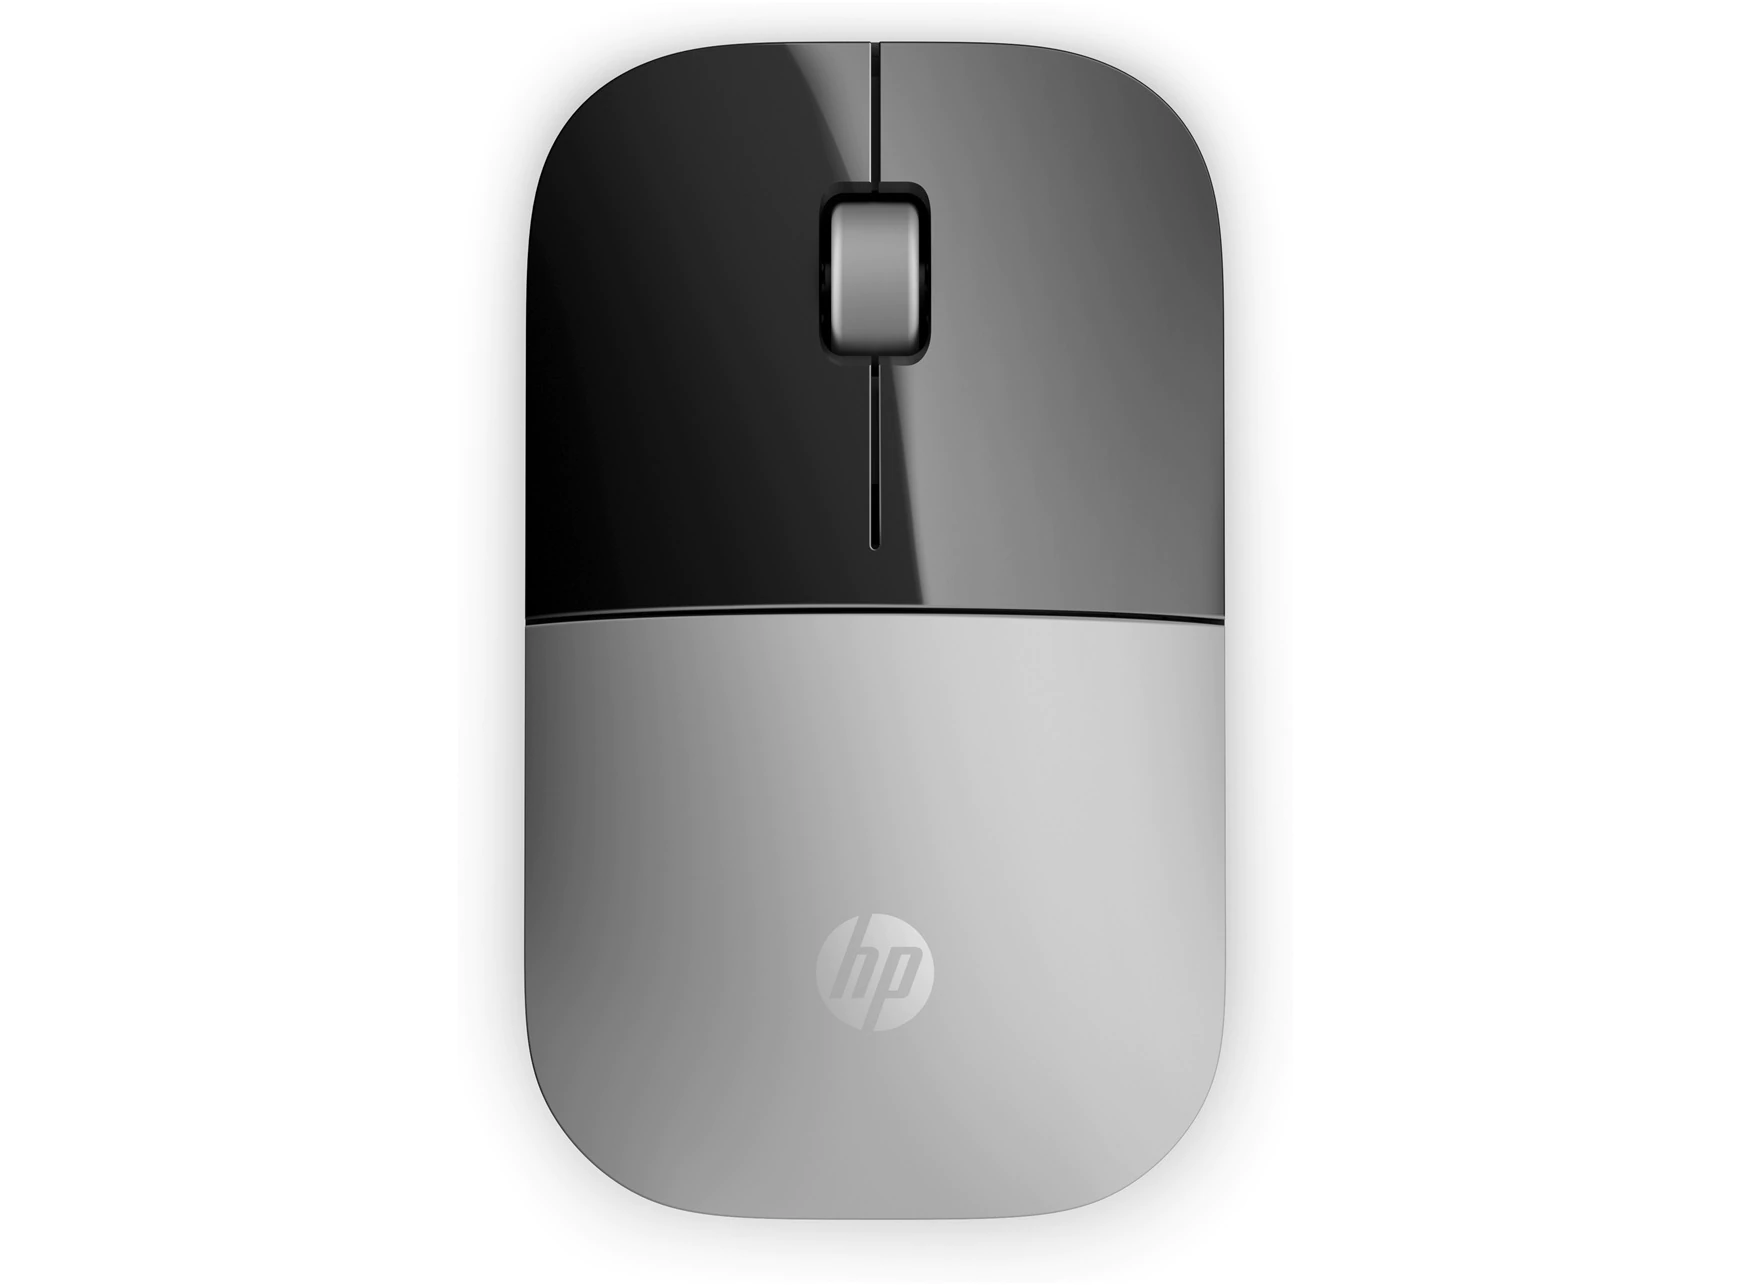 <p><strong>HP Z3700 Wireless Mouse</strong> - Silver X<span style="background-color: rgba(255, 255, 255, 0.85); color: rgb(44, 48, 56);">7Q44AA</span></p>